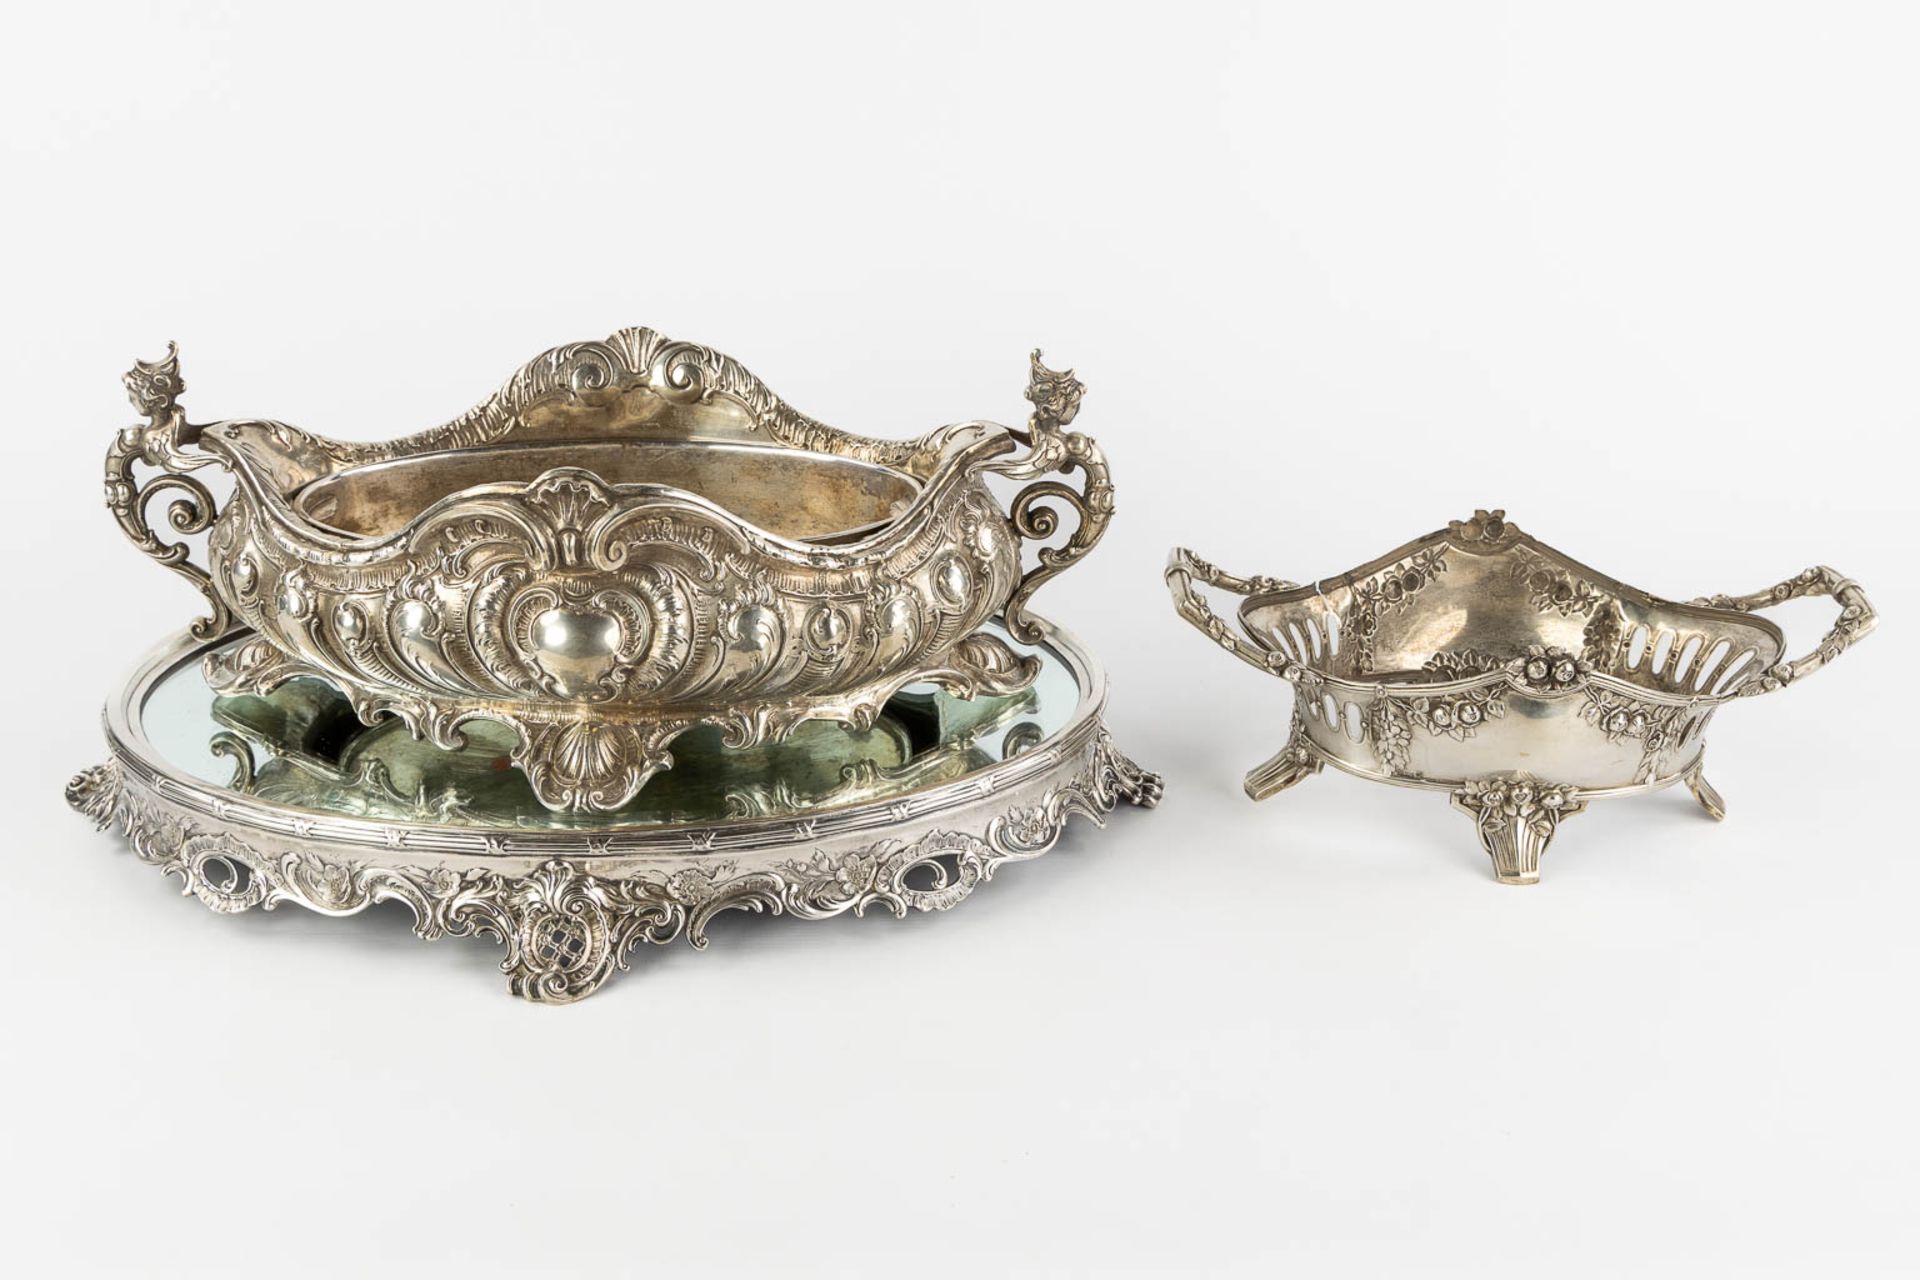 A large table centerpiece, silver, Germany. Added a basket. Circa 1900. (L:38 x W:54 x H:23 cm) - Image 5 of 12